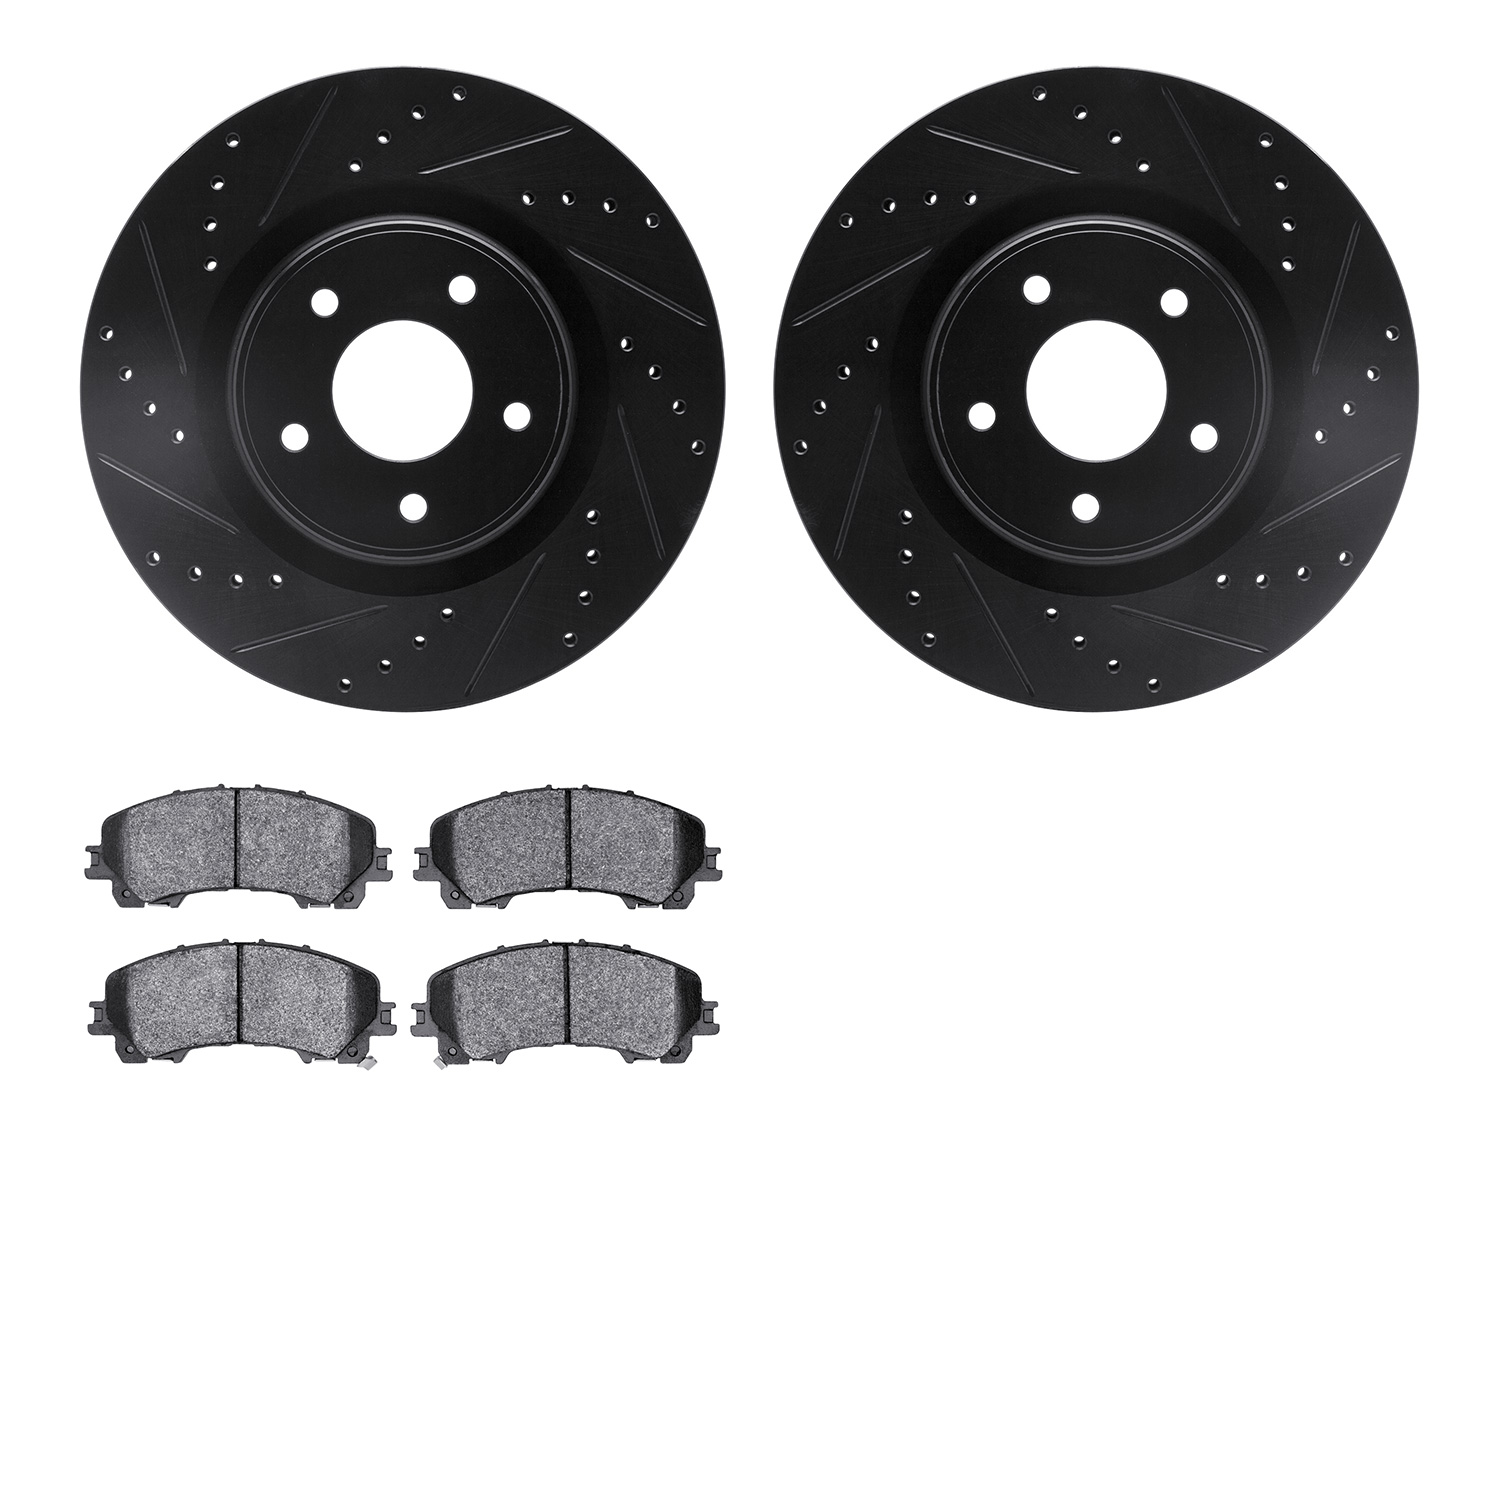 8302-67129 Drilled/Slotted Brake Rotors with 3000-Series Ceramic Brake Pads Kit [Black], Fits Select Infiniti/Nissan, Position: